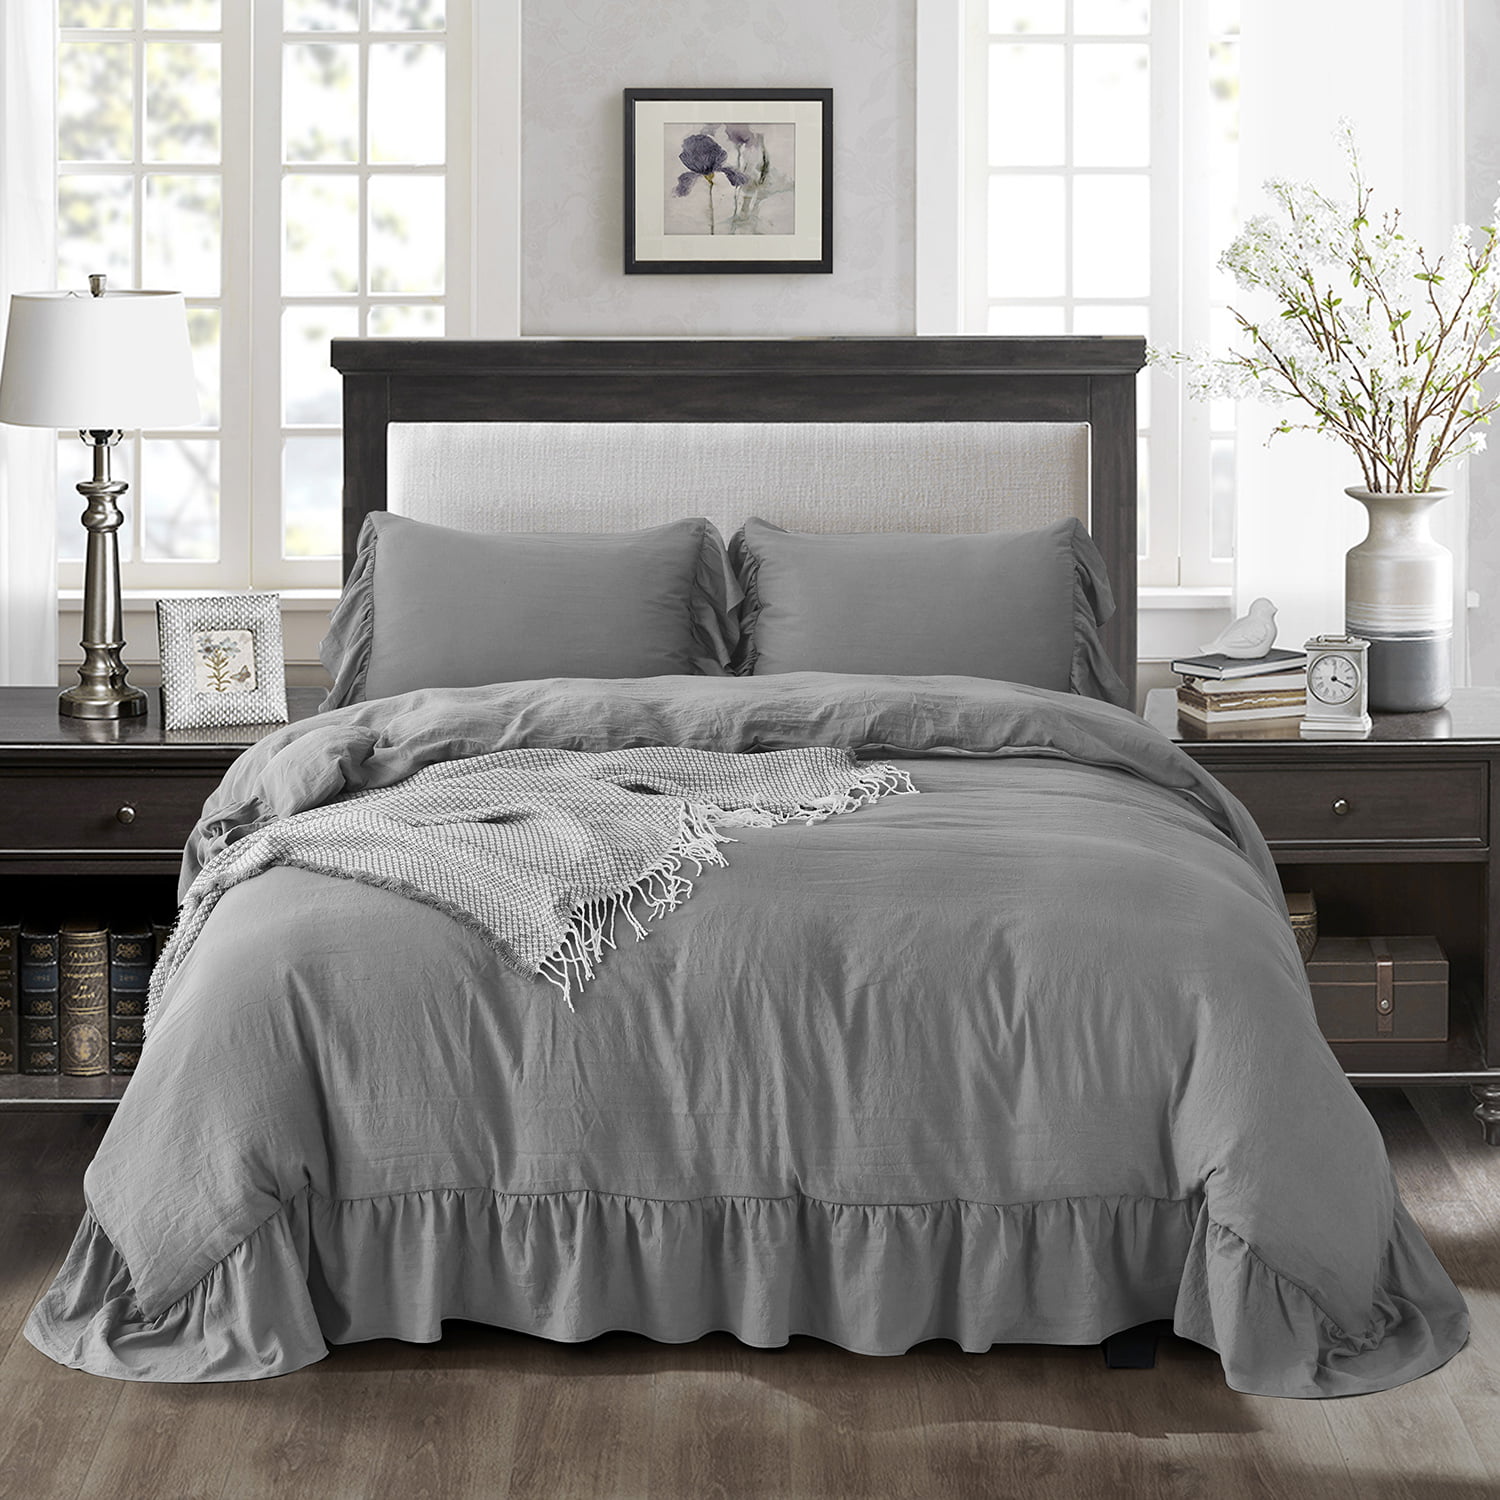 Homechoice 3 Piece Washed Duvet Cover King with Handcraft Ruffle - 100%